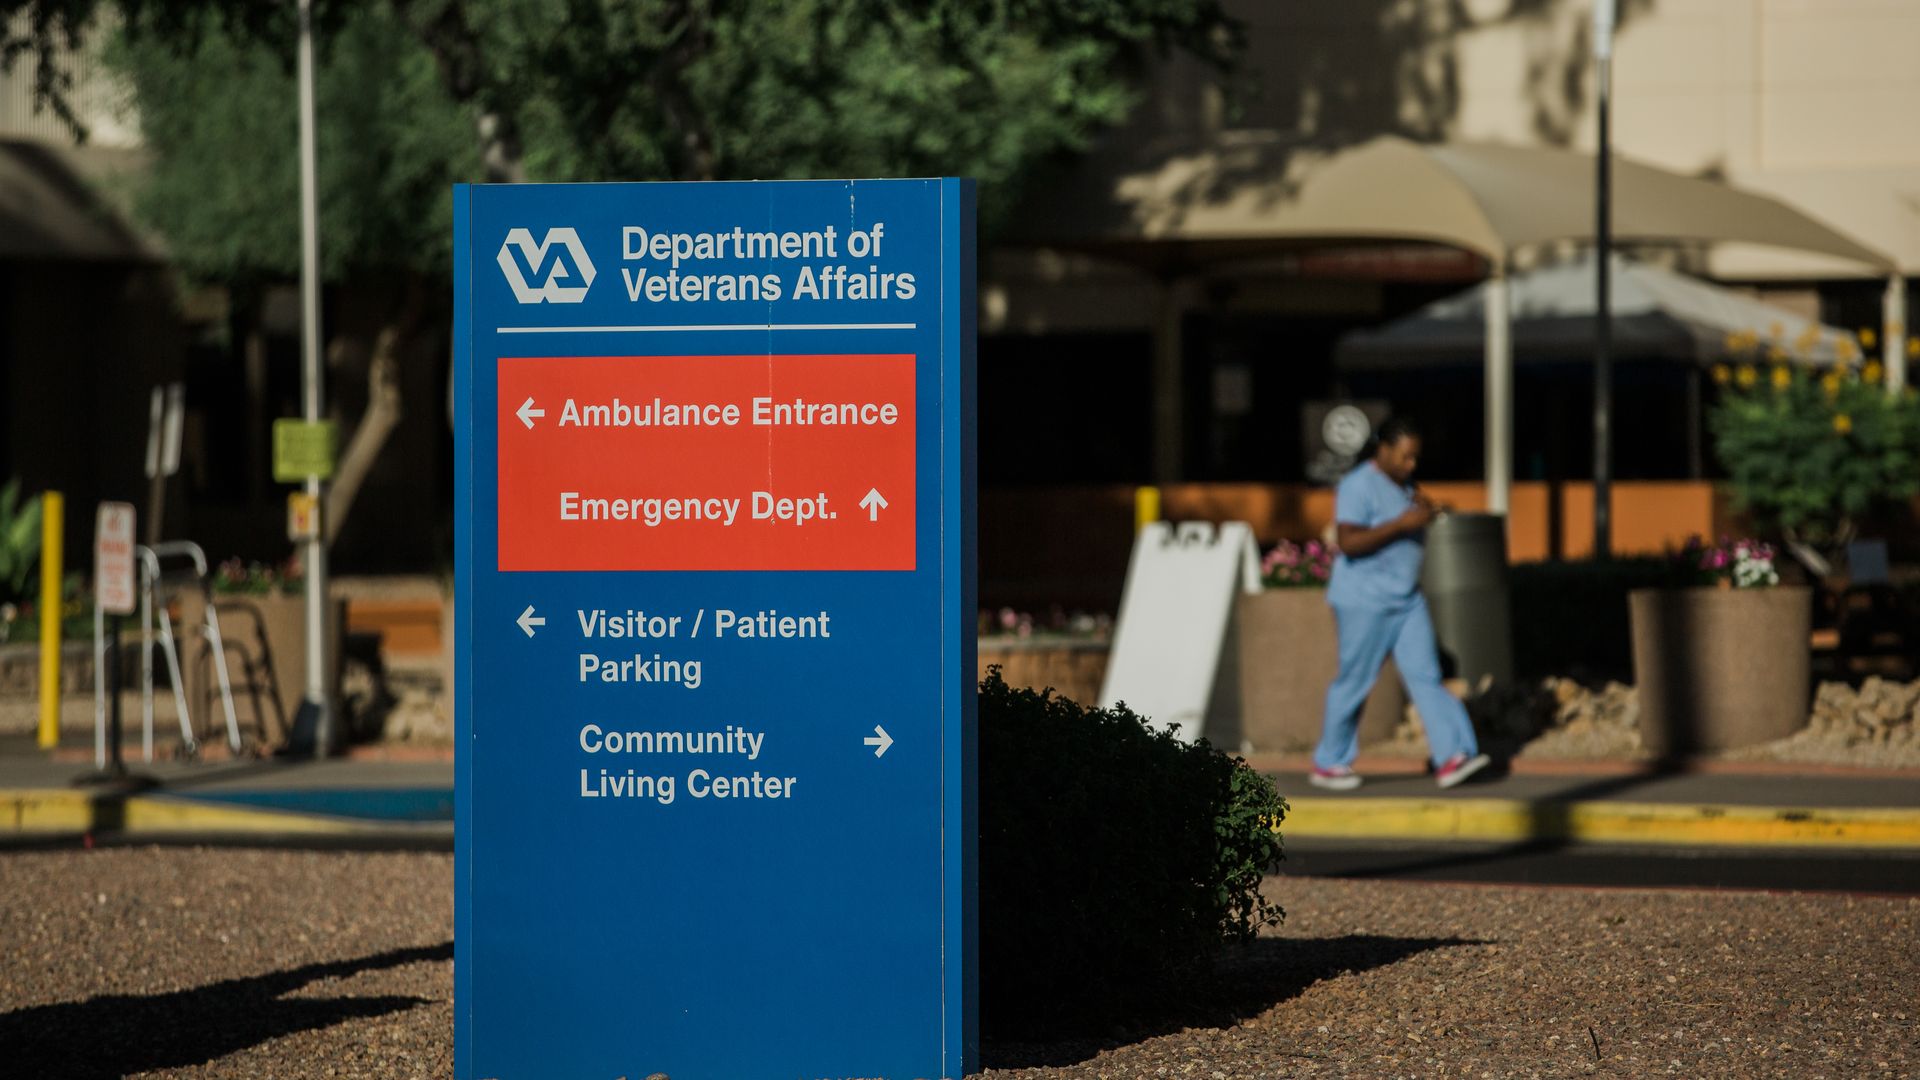 A blue and red sign in front of a VA hospital that informs people locations of different departments.